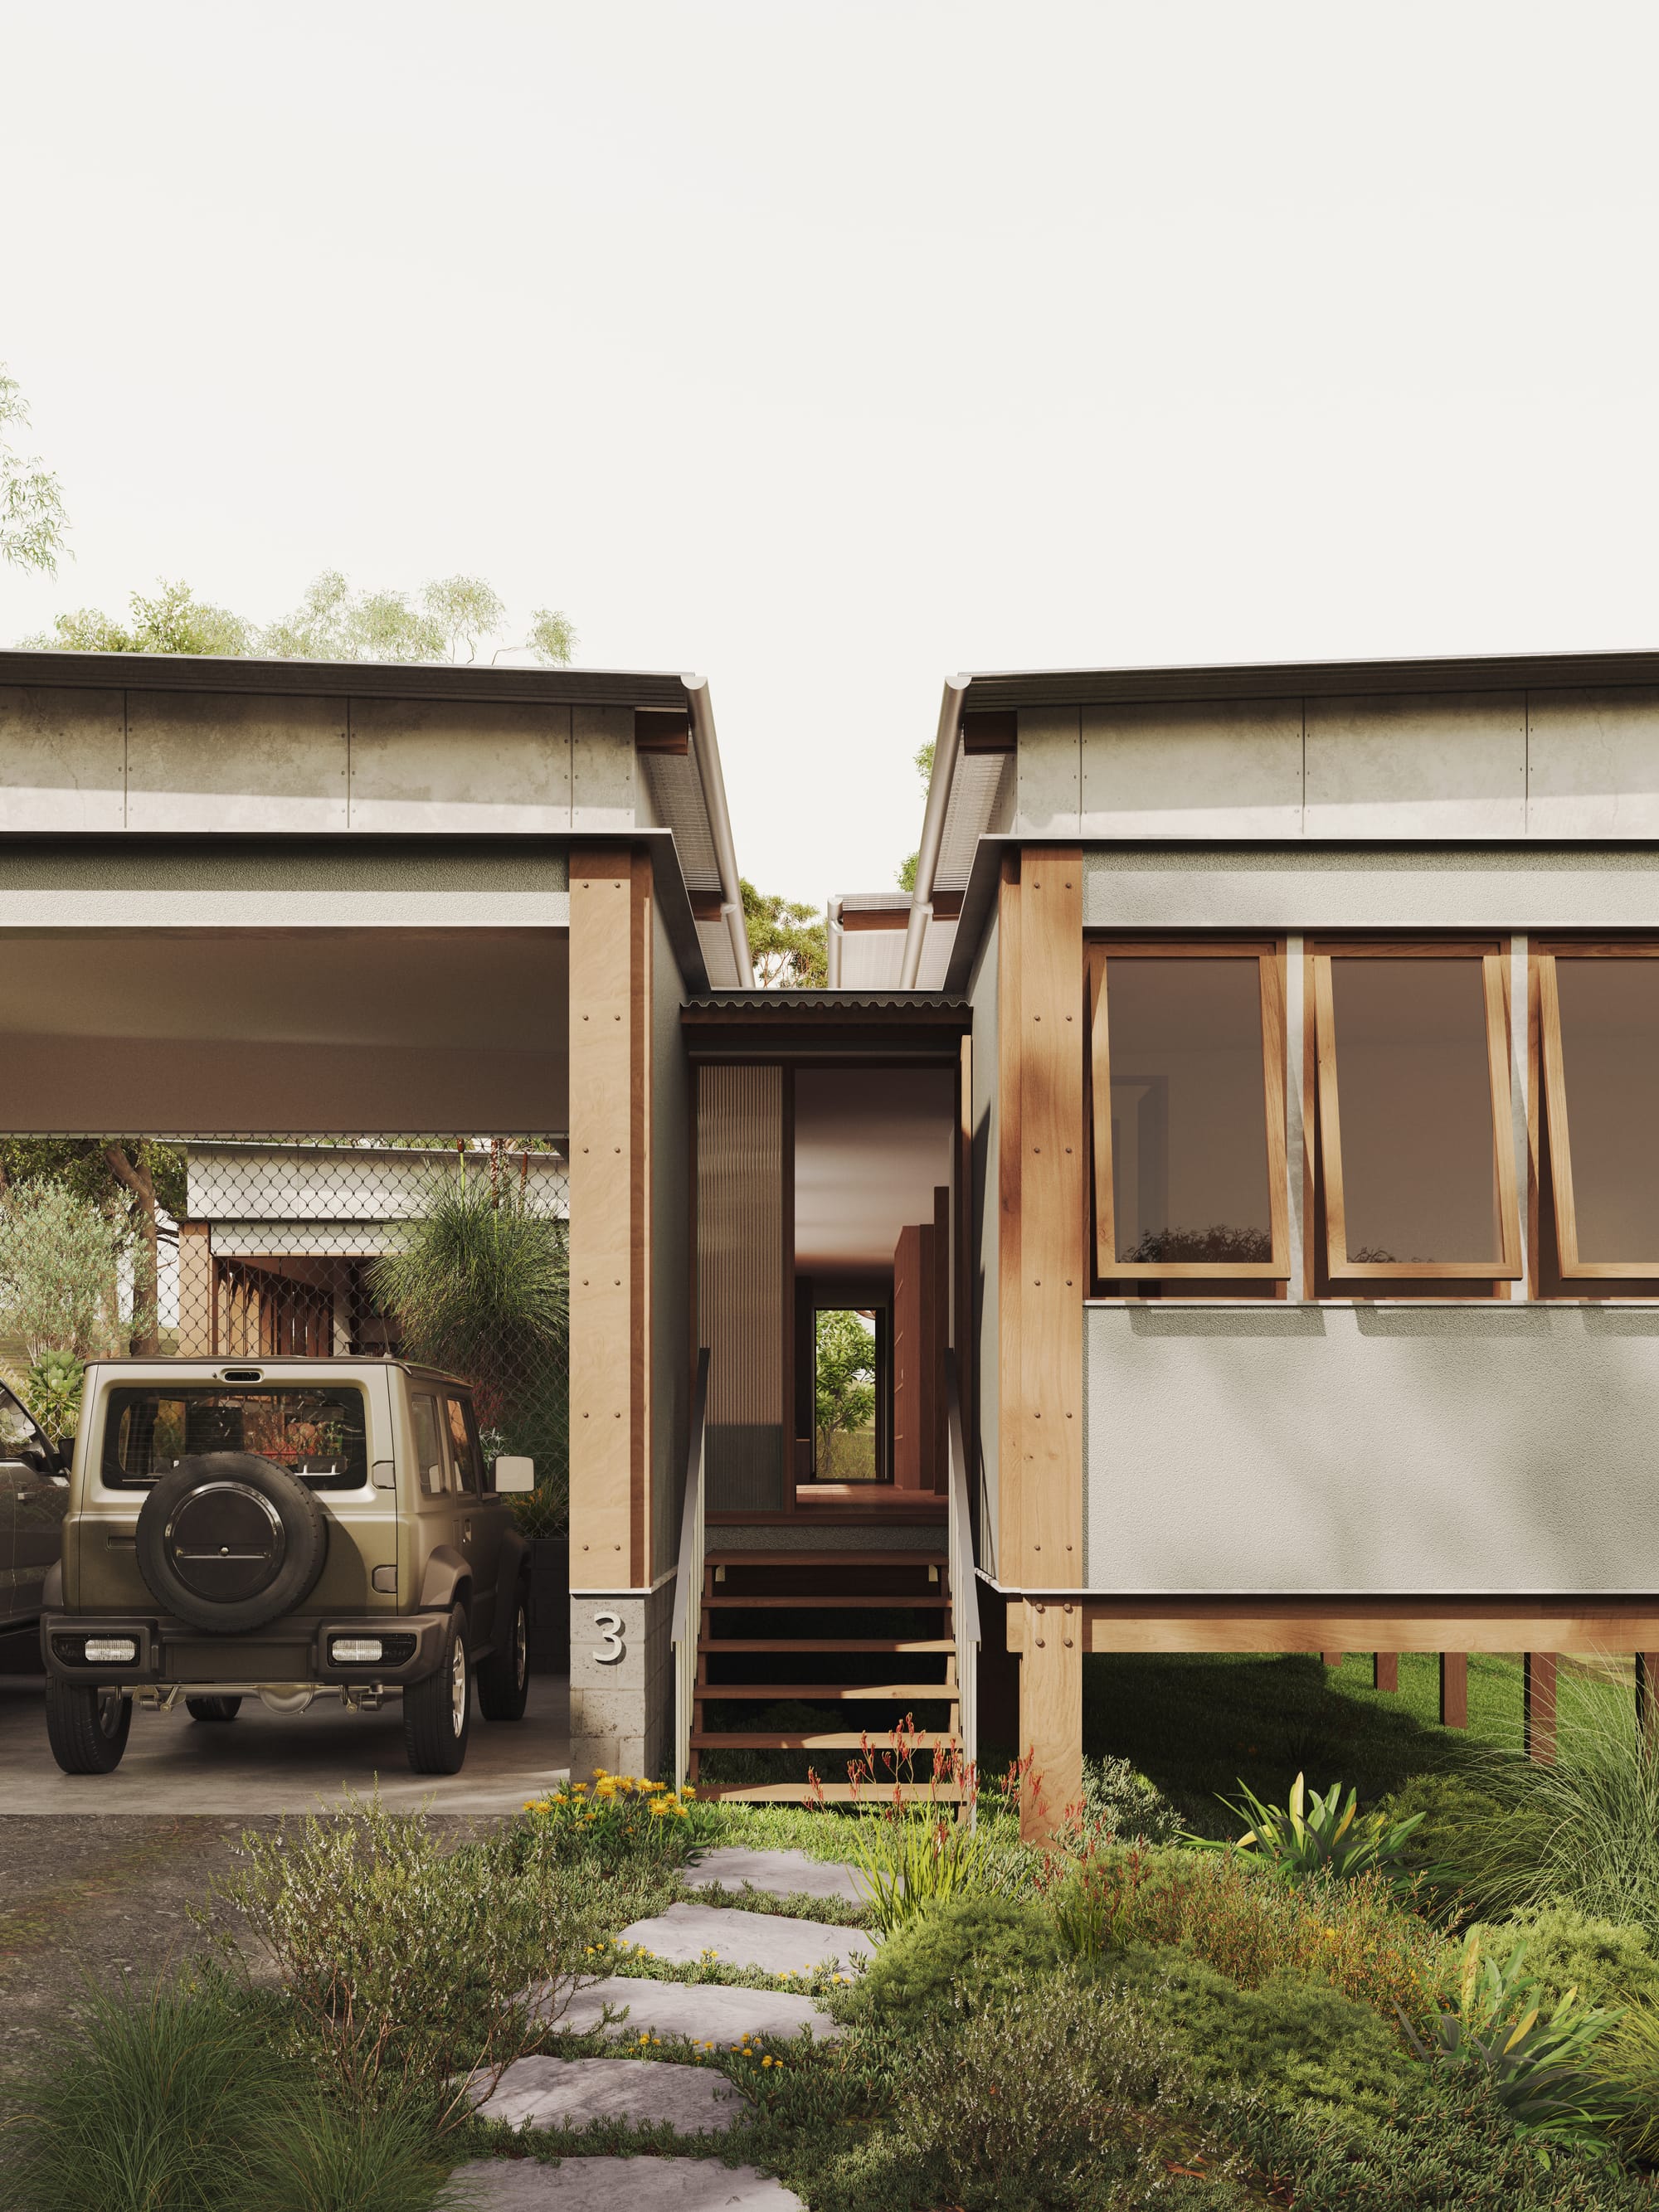 Mulloway House. Renders copyright of CHOIRENDER. Exterior of home on timber stilts with timber pillars and window frames. Car in open driveway. Timber steps leading from stone paver path to front door.